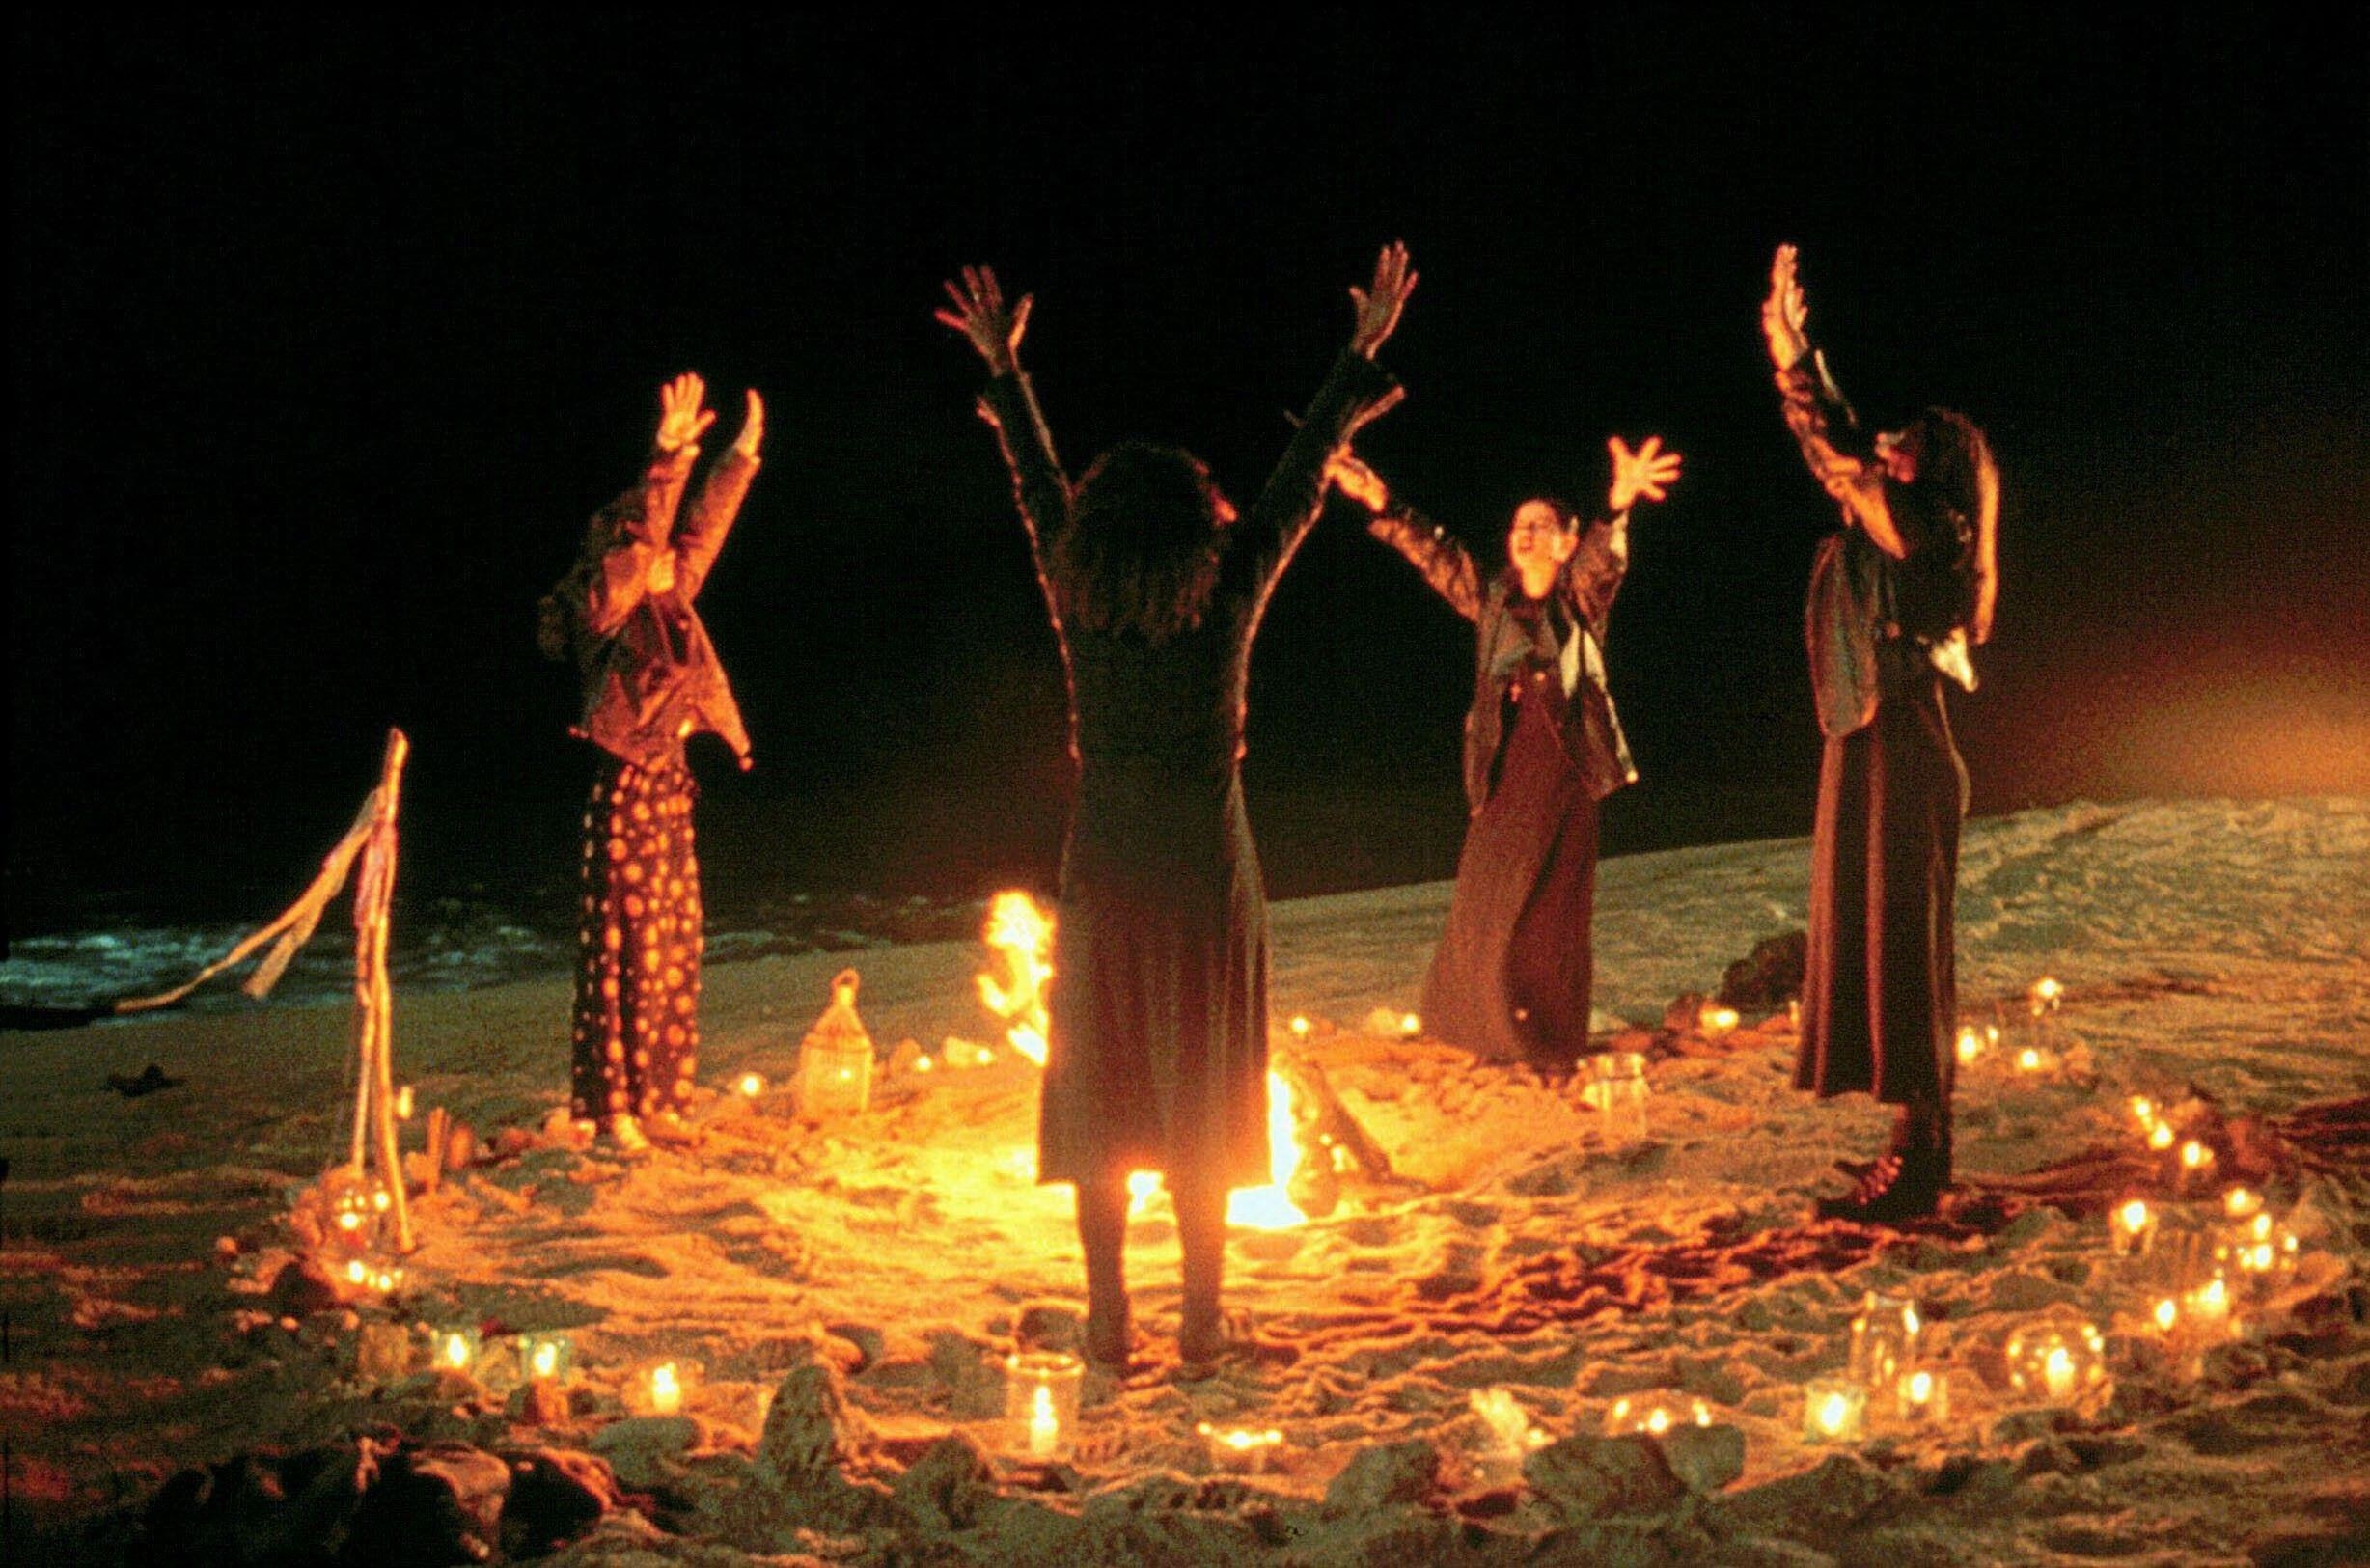 Four young women attempt to conjure magic on a beach